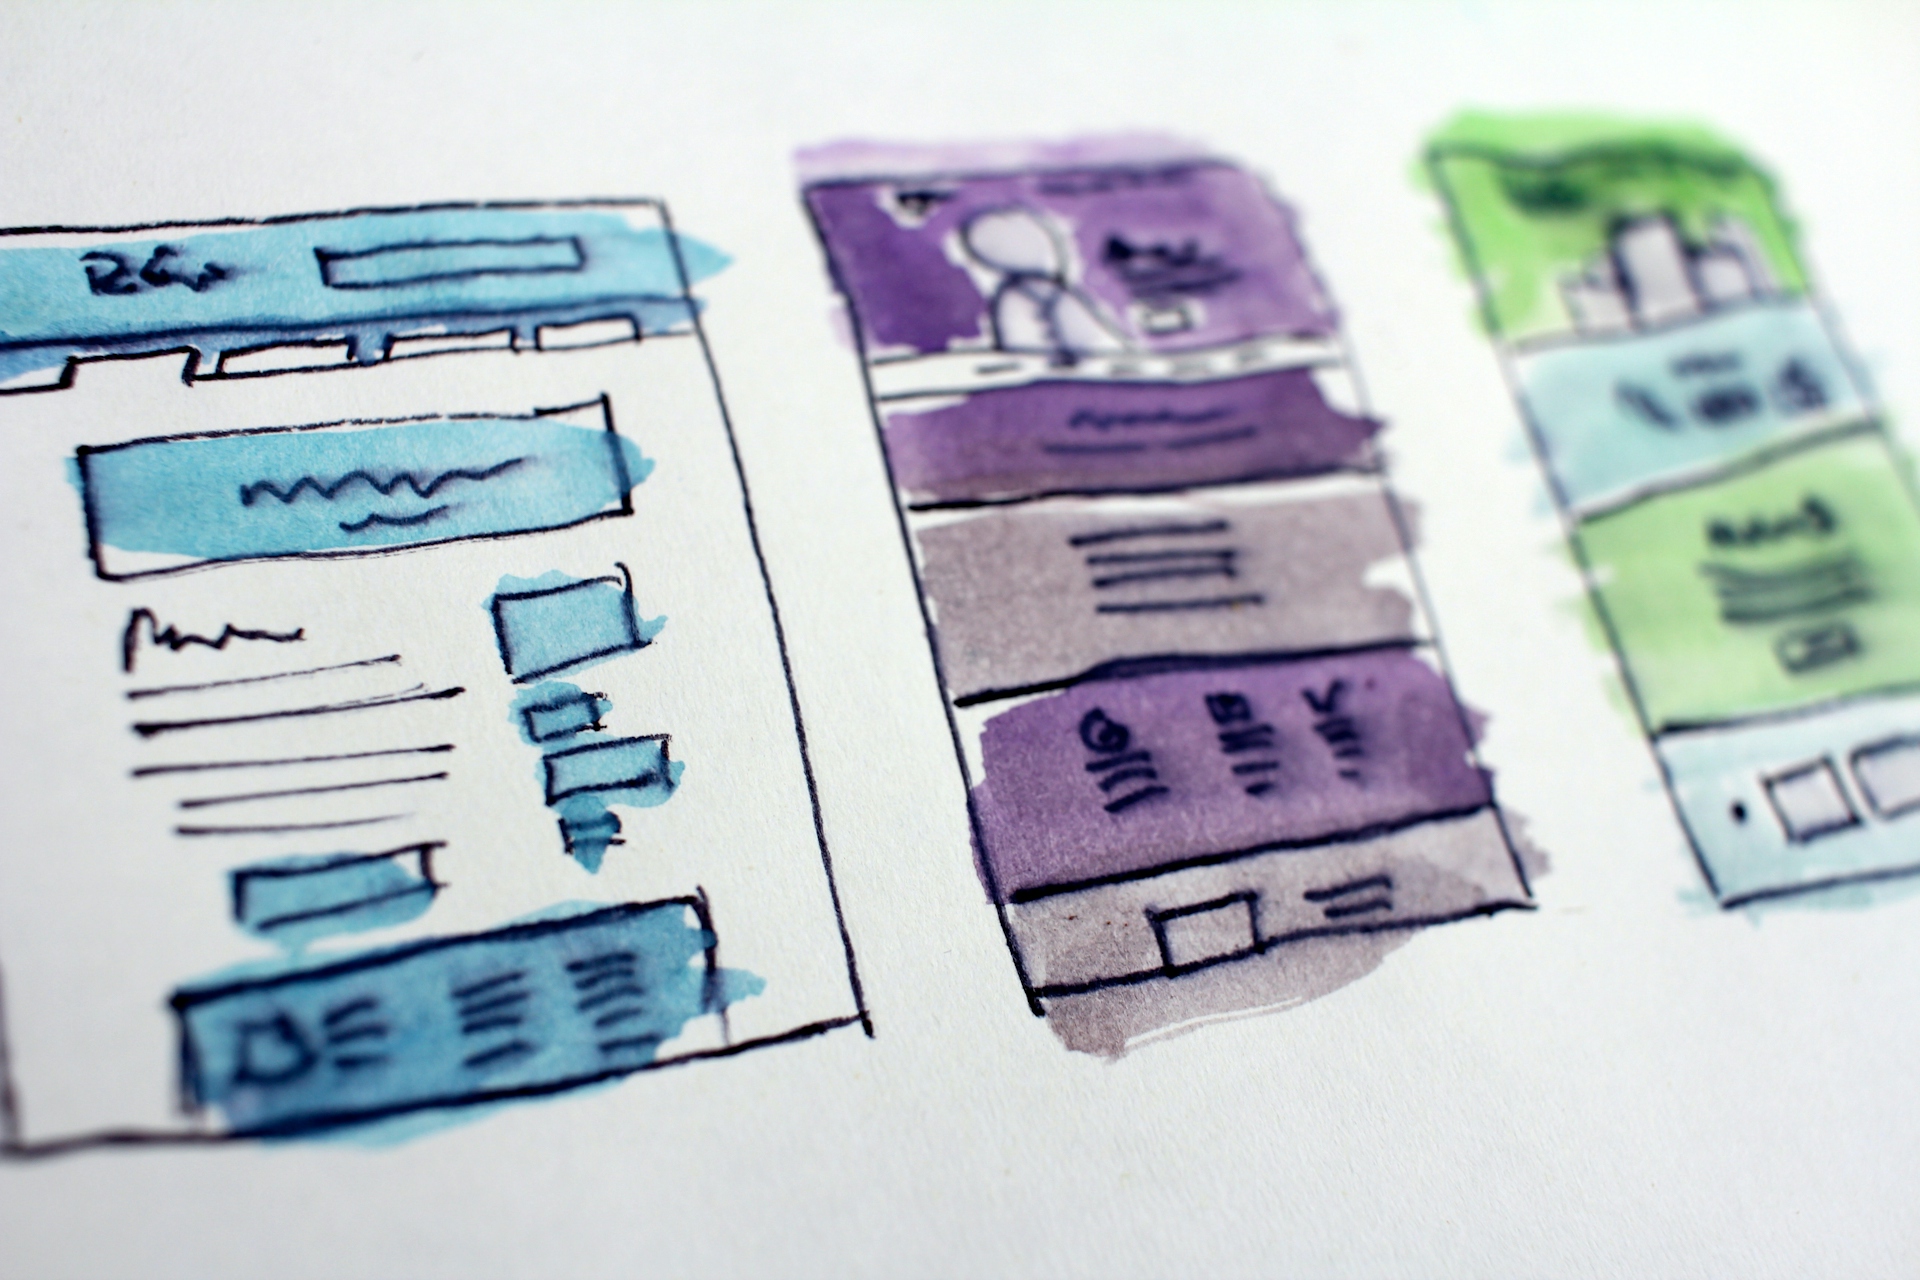 The Ultimate Designer's Guide to Rapid Prototyping